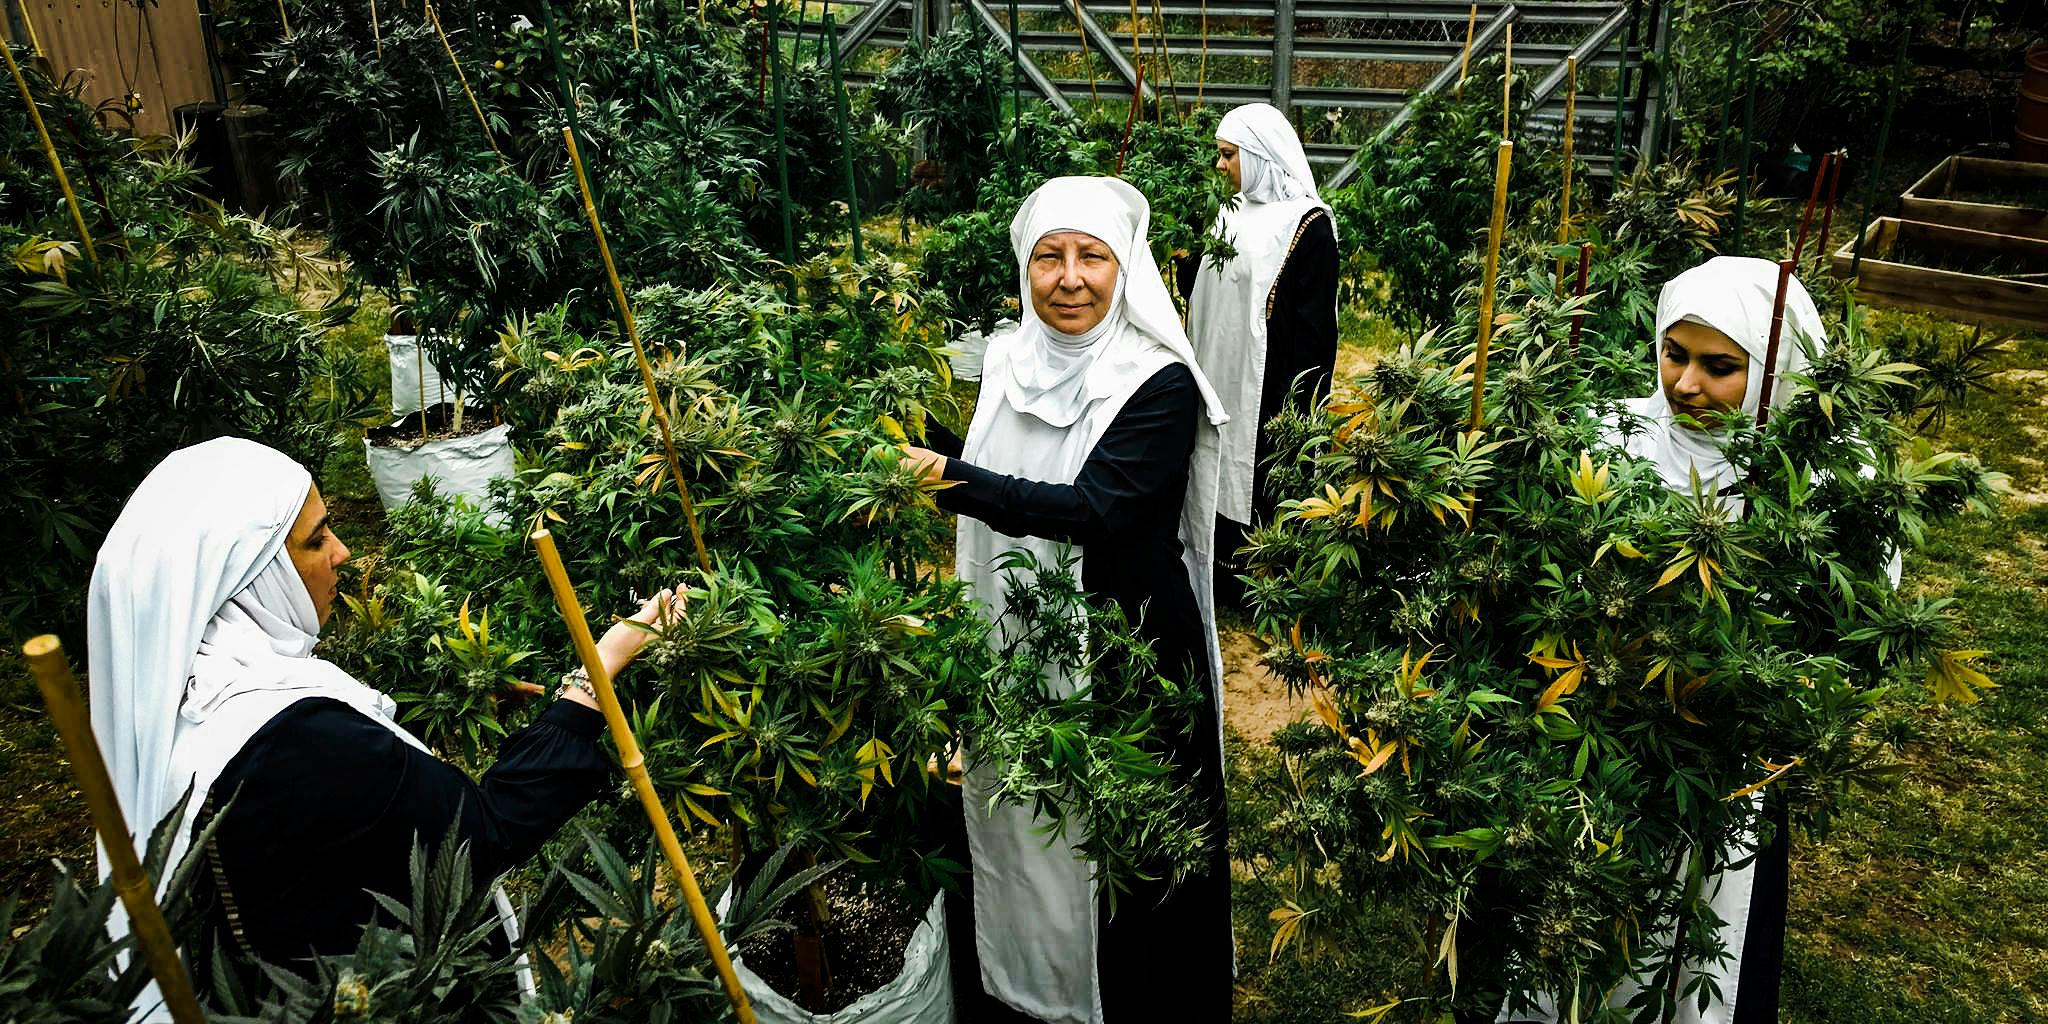 New Documentary Profiles Weed Growing Nuns Will Release This Fall